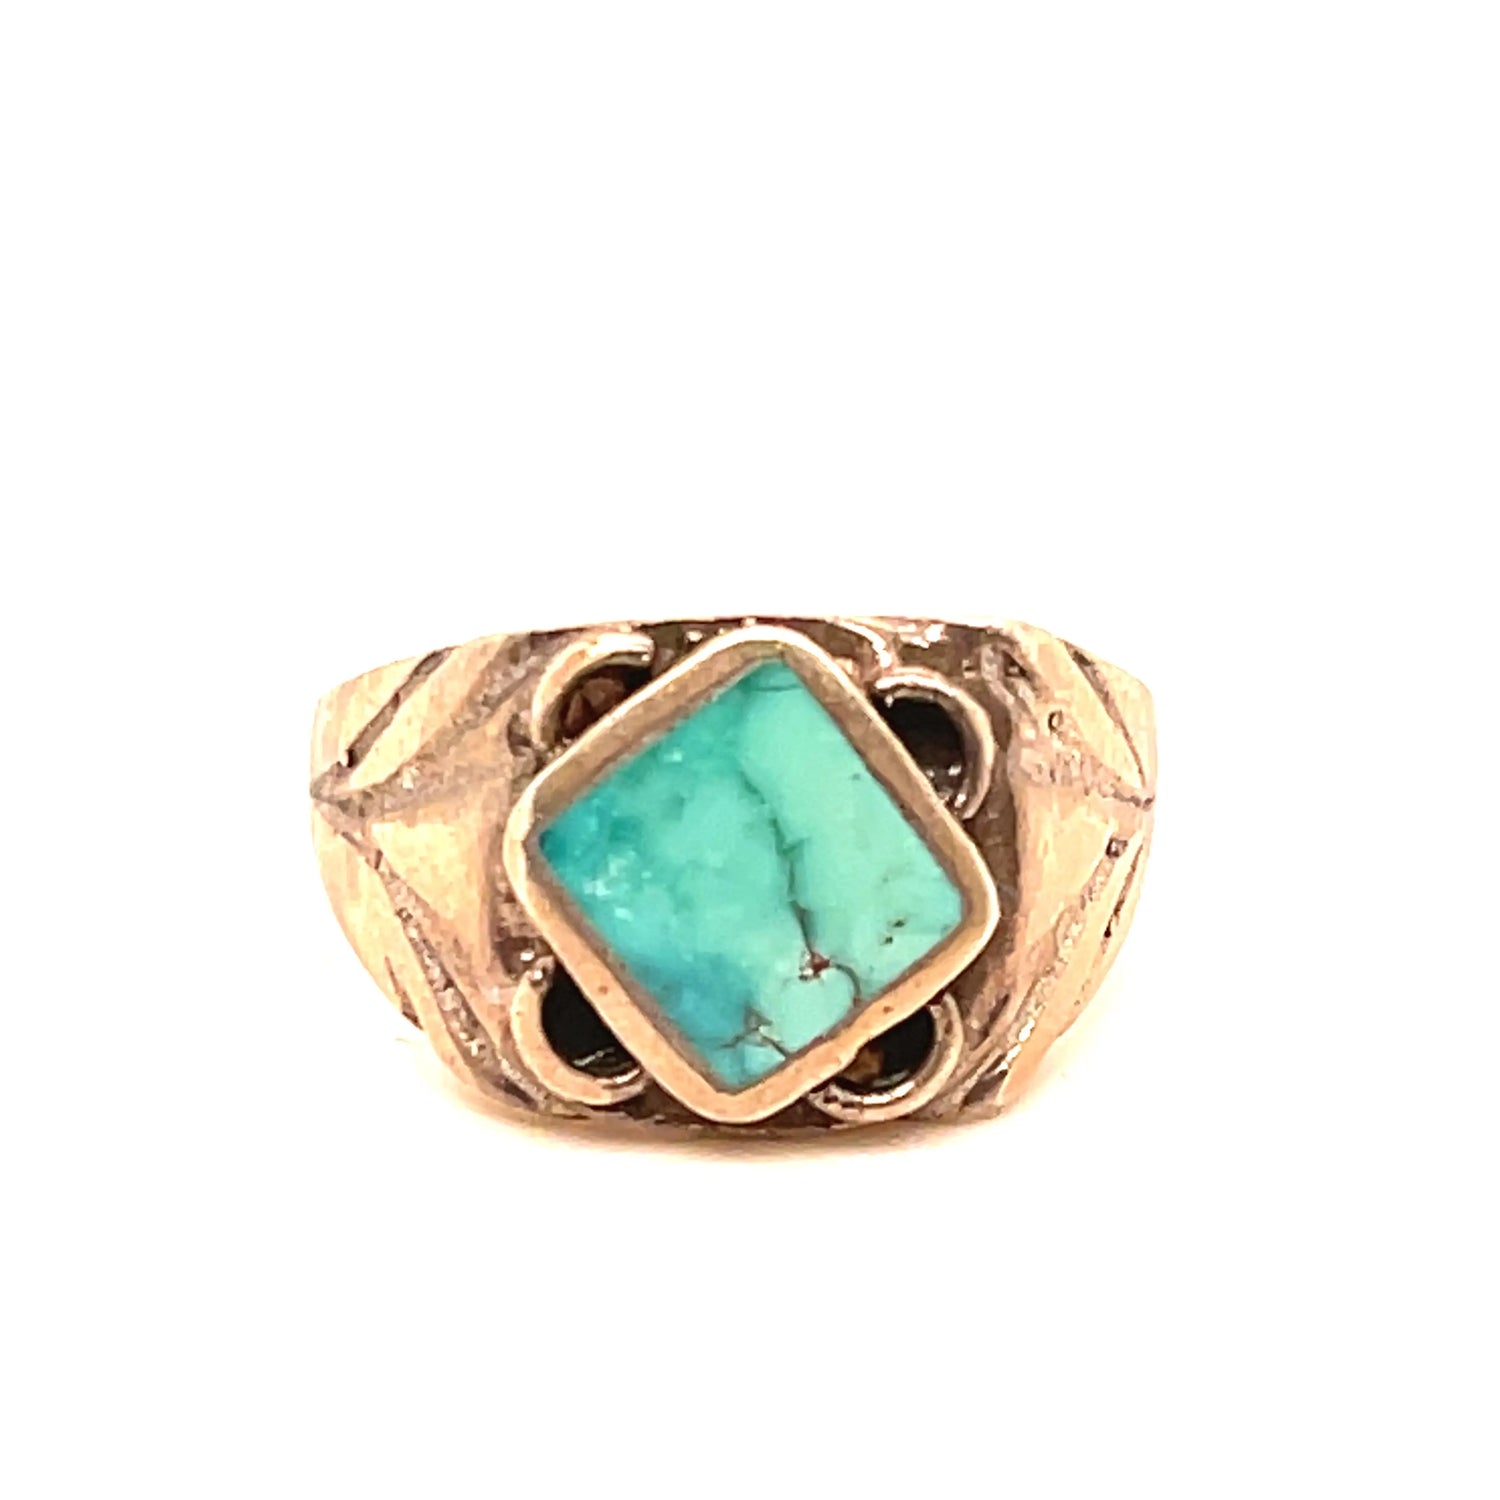 Vintage 1920s Turquoise Ring - Squash Blossom Vail